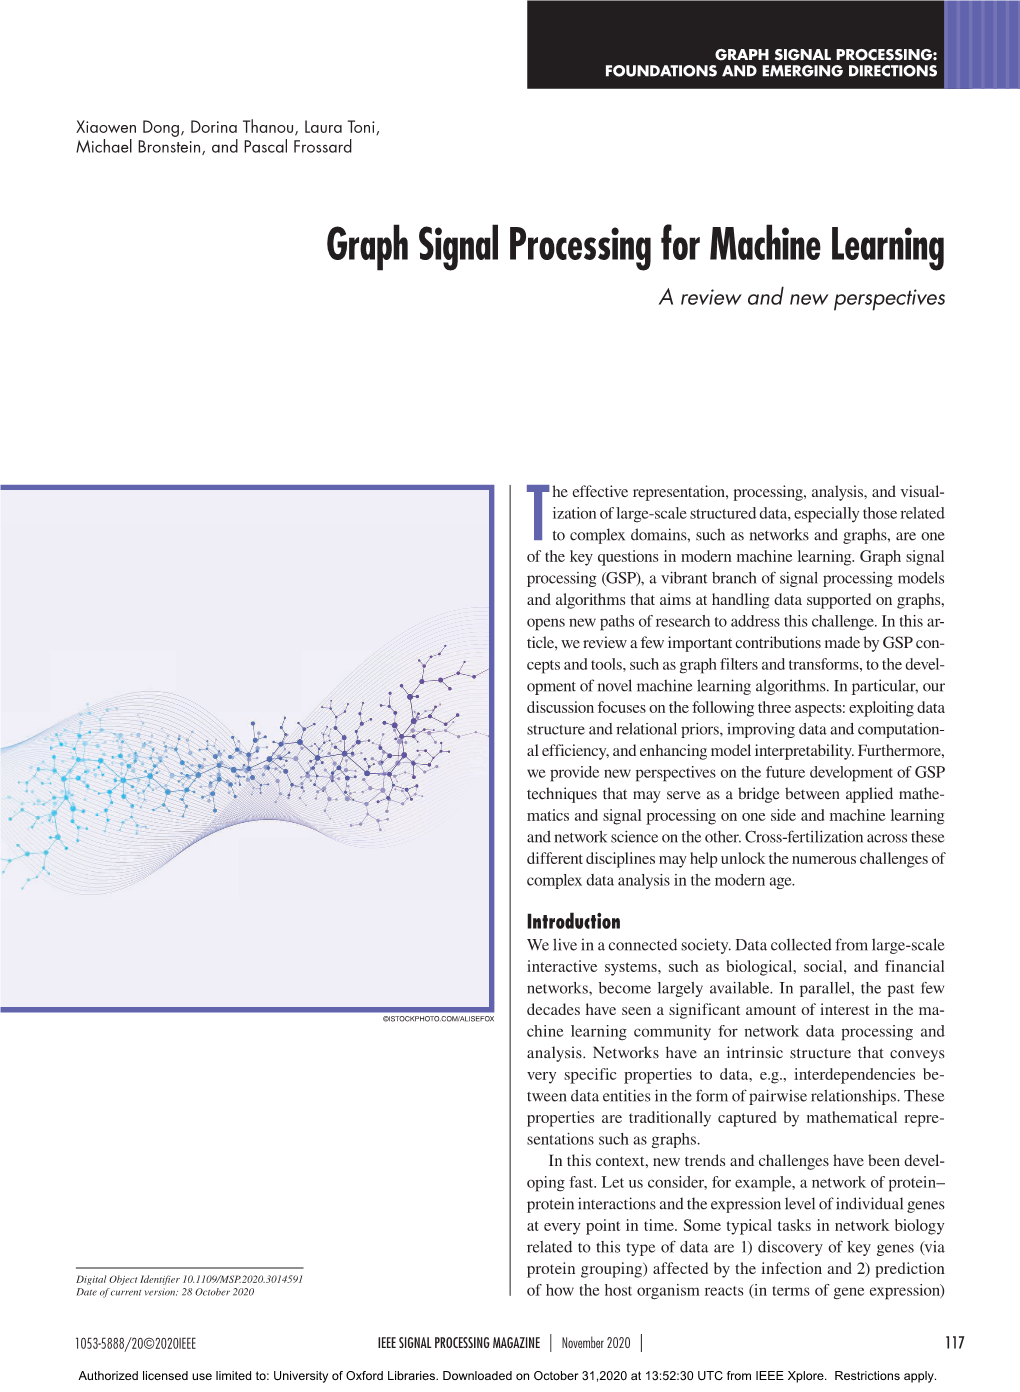 Graph Signal Processing for Machine Learning a Review and New Perspectives